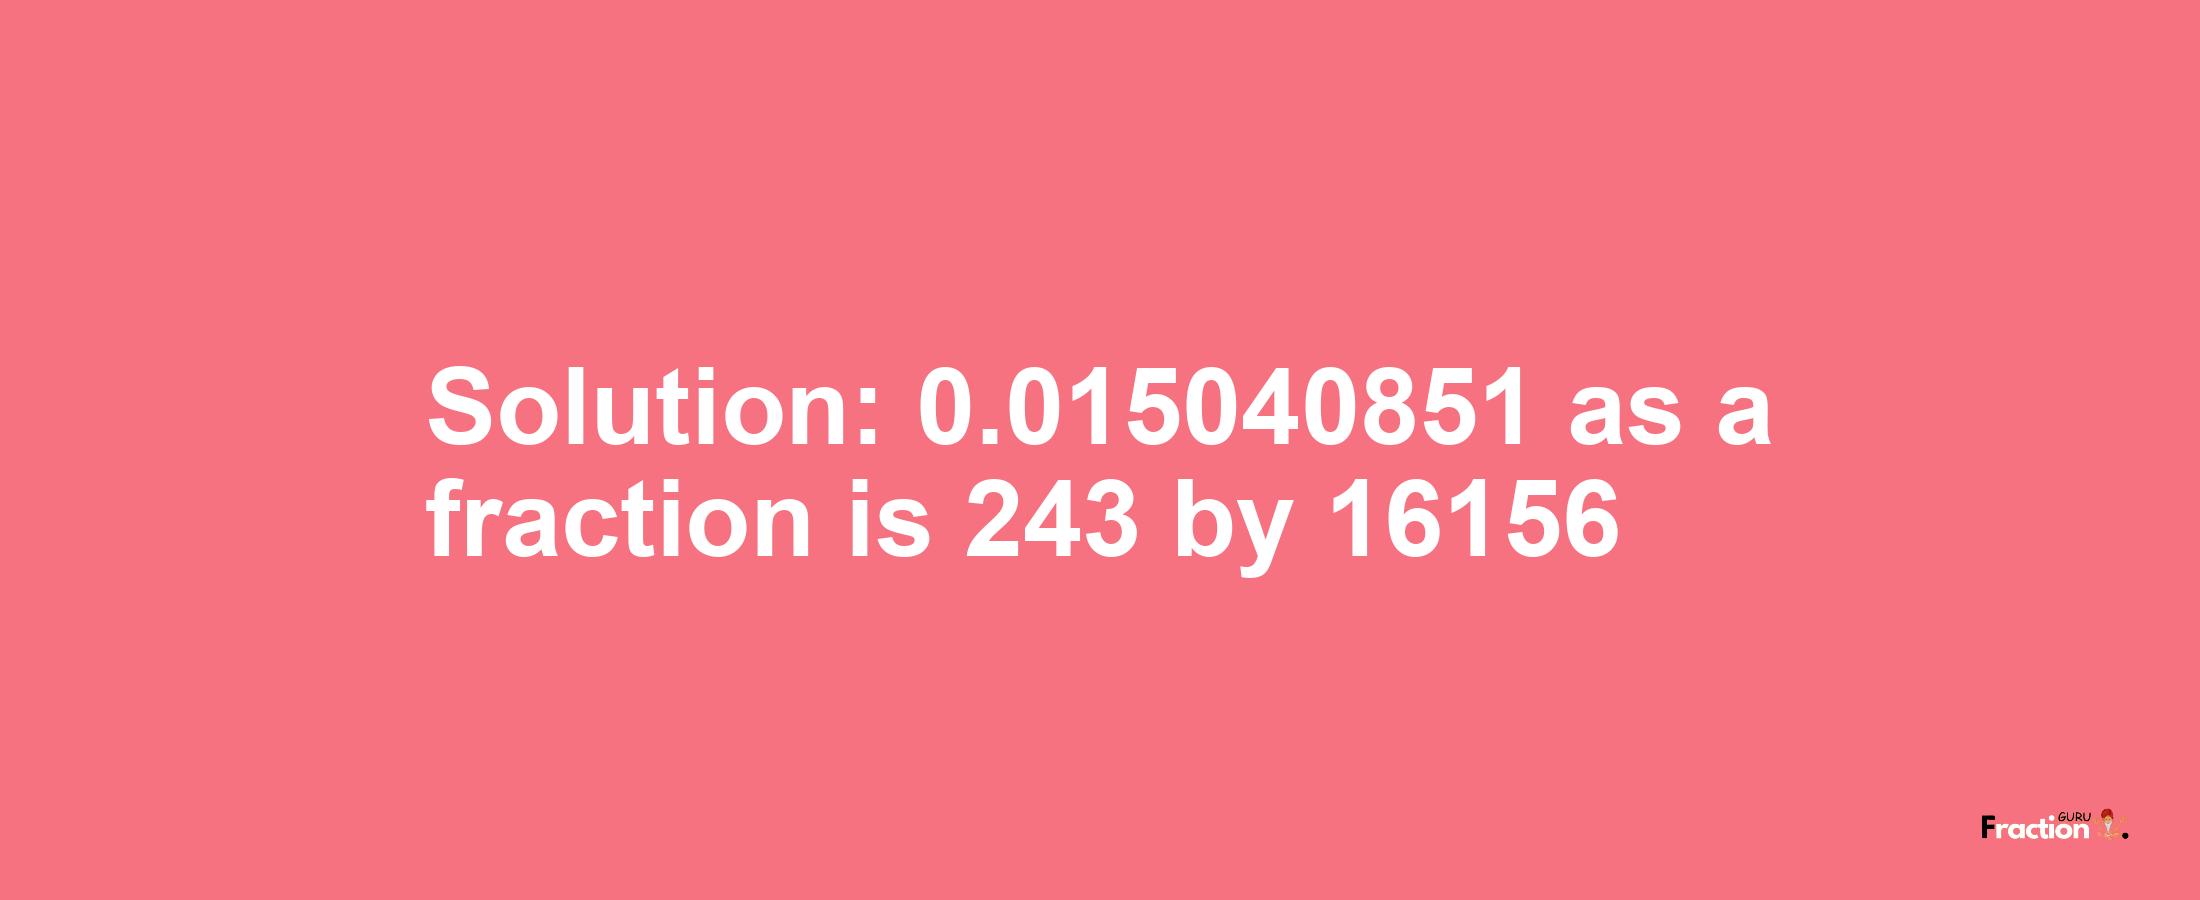 Solution:0.015040851 as a fraction is 243/16156